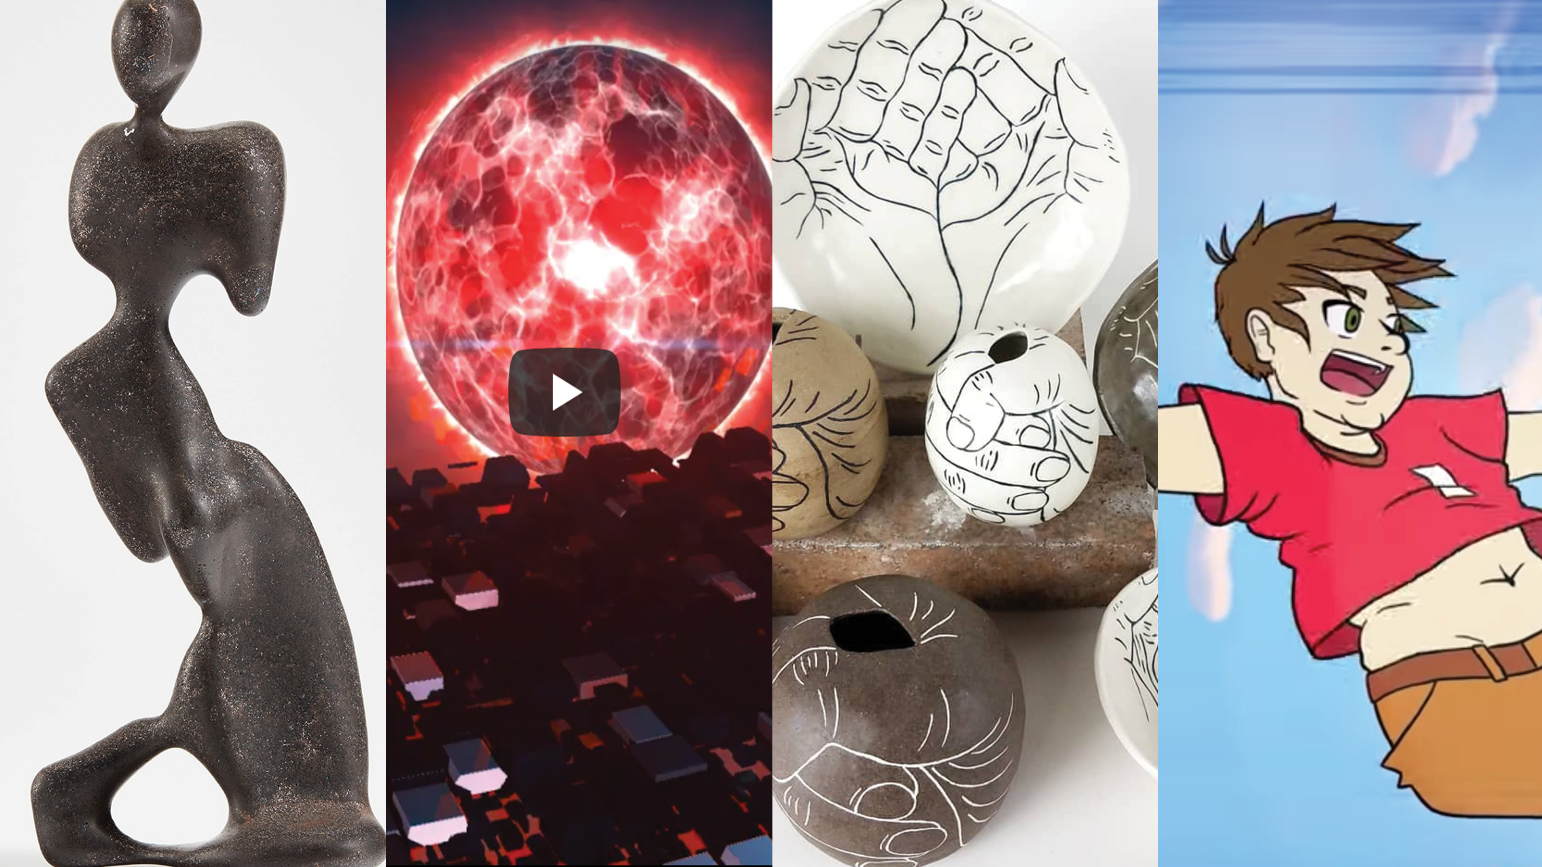 Four images: 1: image of an abstract sculpture of a human form; 2: still from music video showing big red sun; 3: images of ceramics items with hand decoration; still from video showing a falling anime character